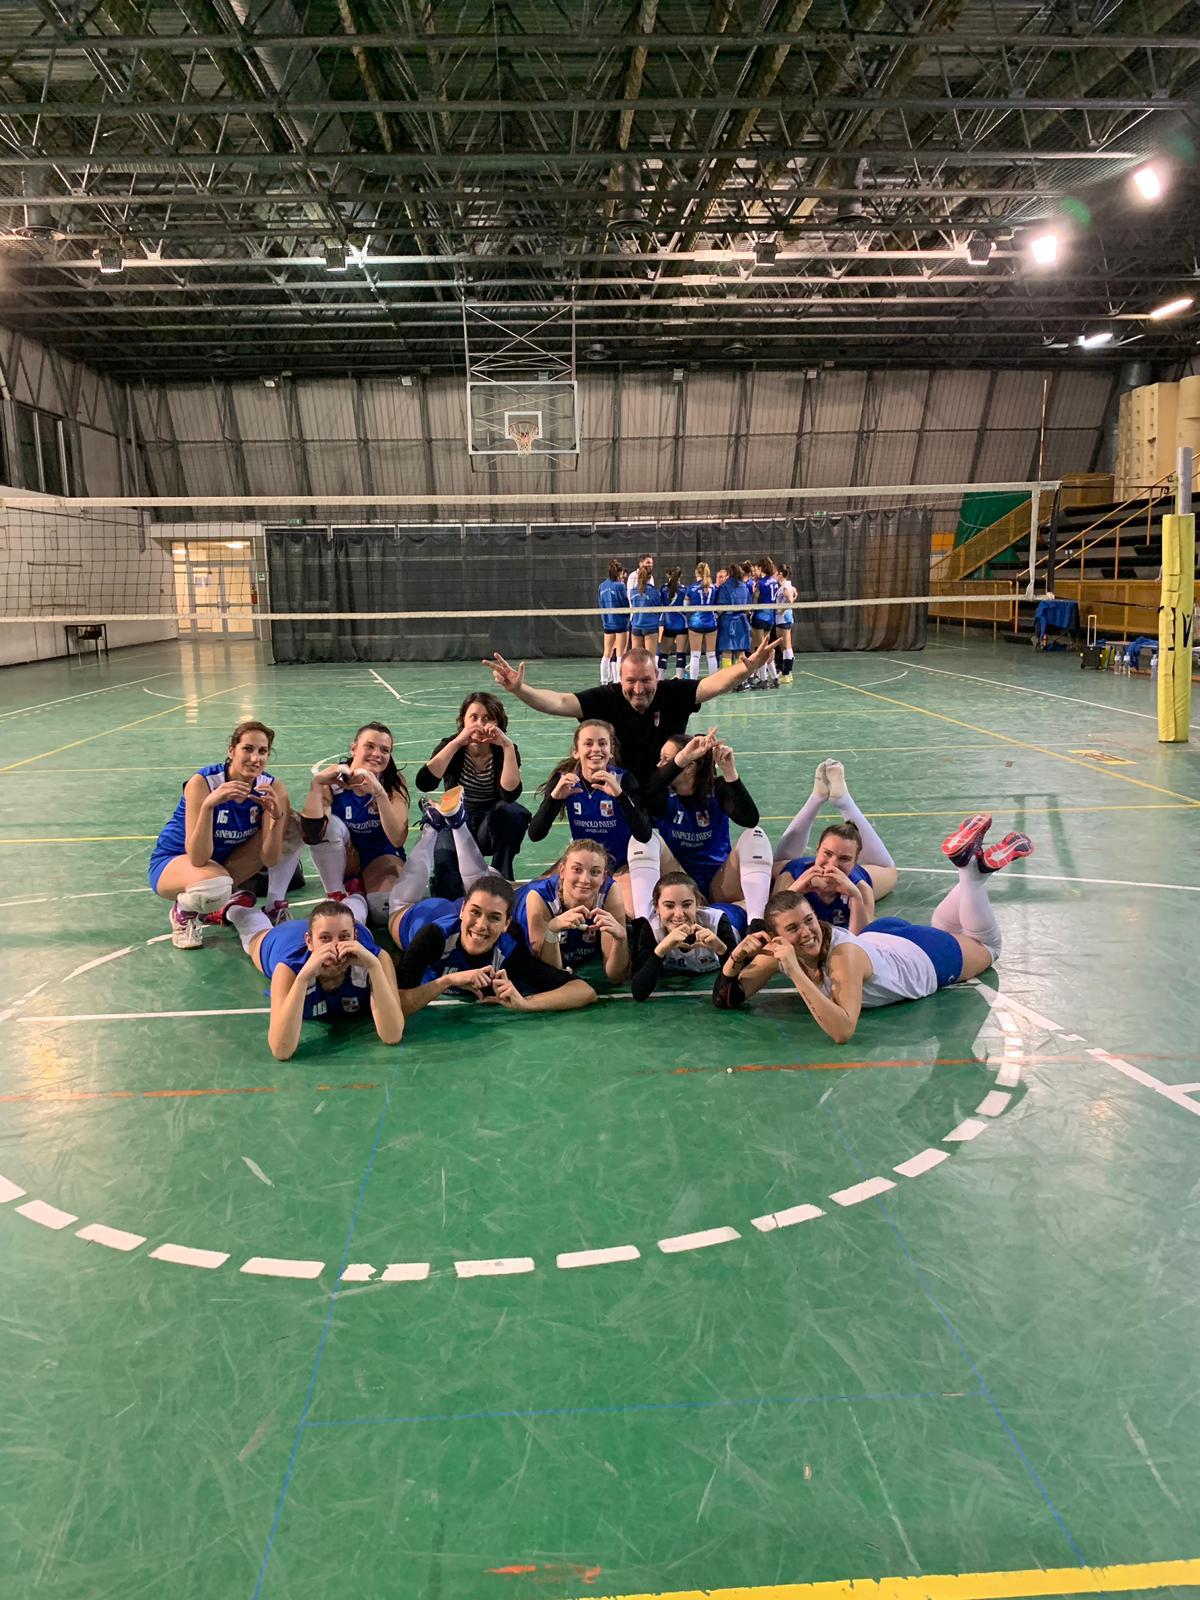 LUCCHESE PALLAVOLO - V.P. VOLLEY 3-0 ( 27-25 25-21 25-19 )